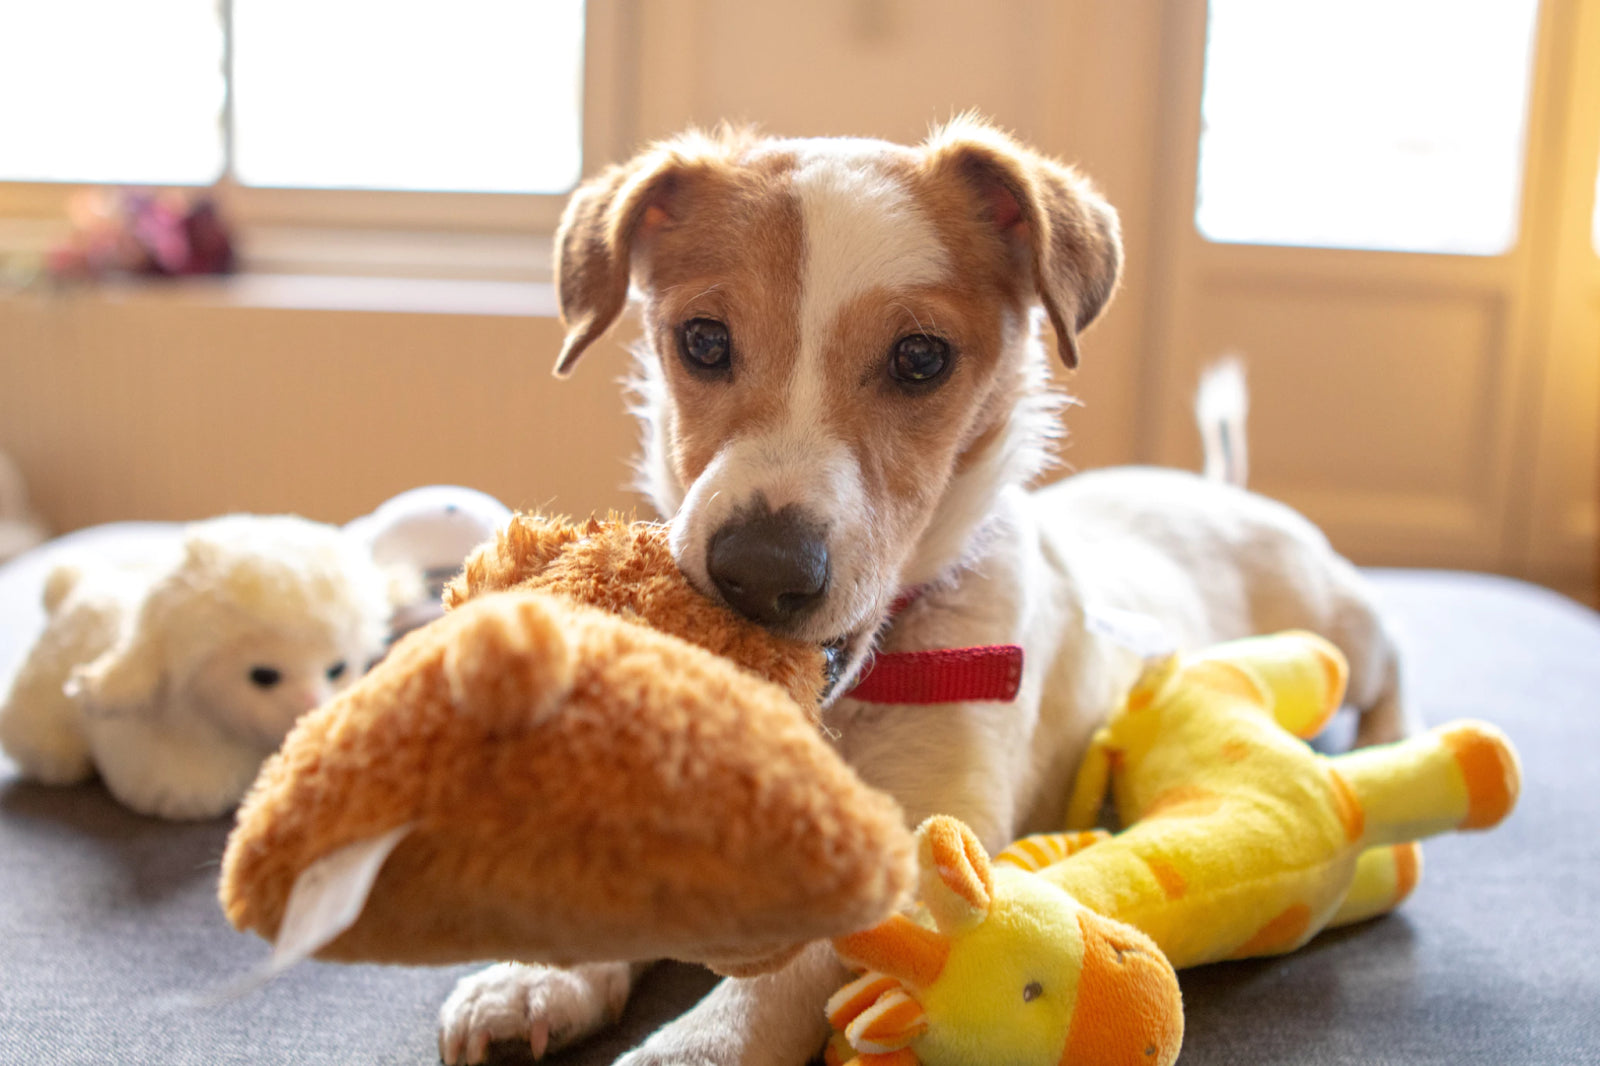 Selling pet toys on Shopify